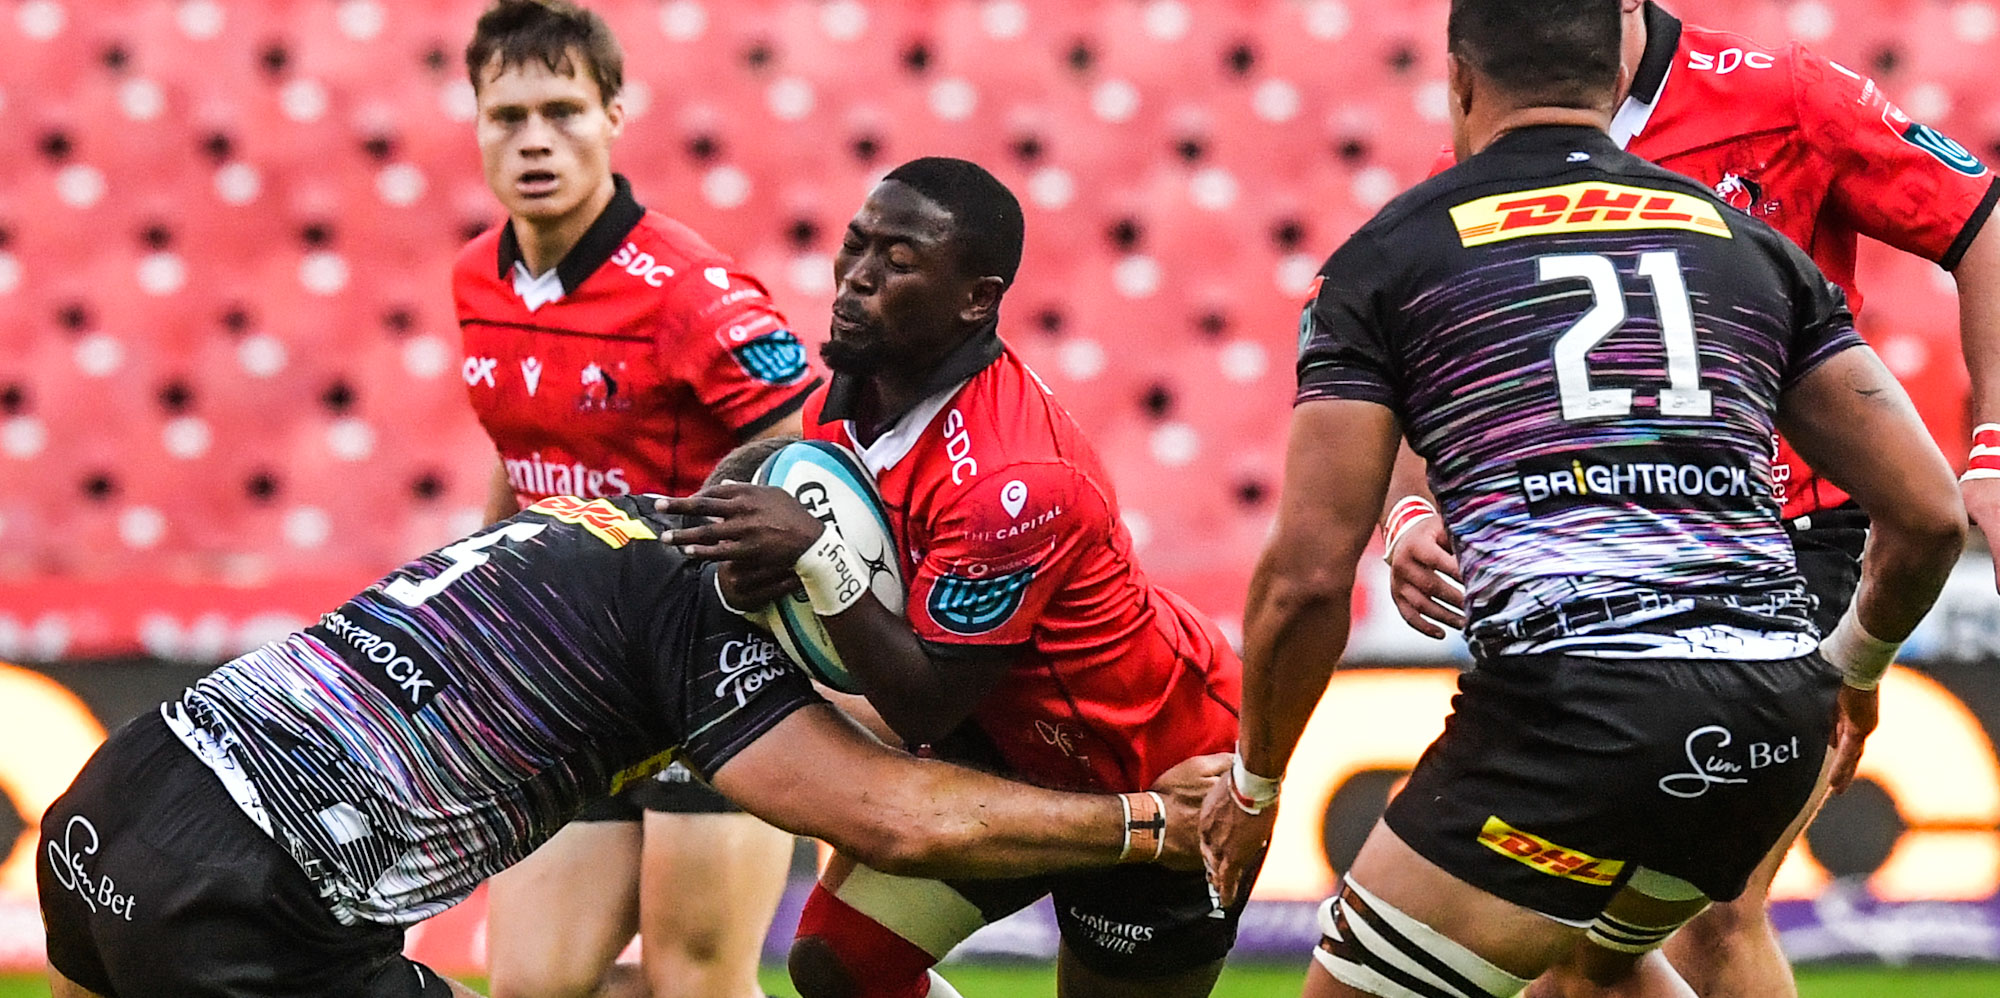 Sanele Nohamba of the Emirates Lions in action against the DHL Stormers earlier in the season.